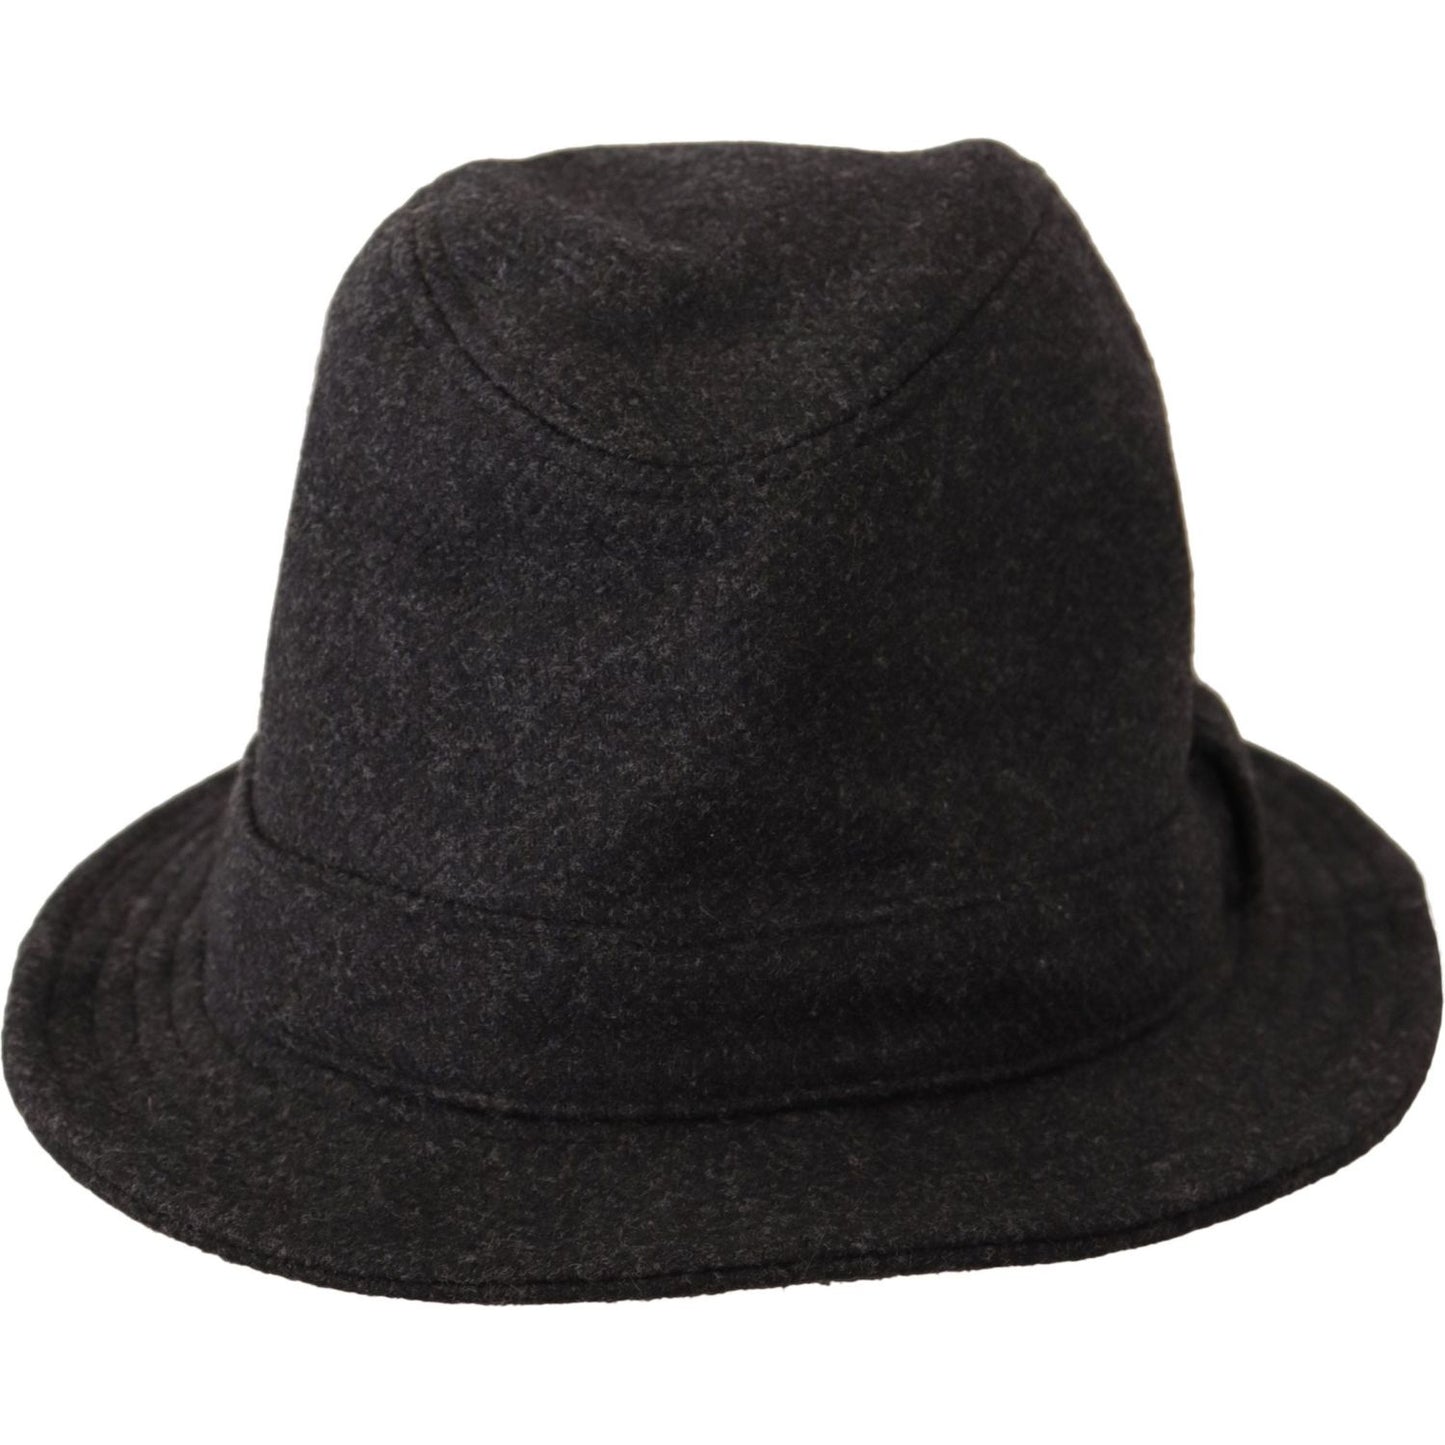 Dolce & Gabbana Elegant Gray Trilby Hat in Wool and Cashmere gray-virgin-wool-logo-fedora-trilby-cappello-hat